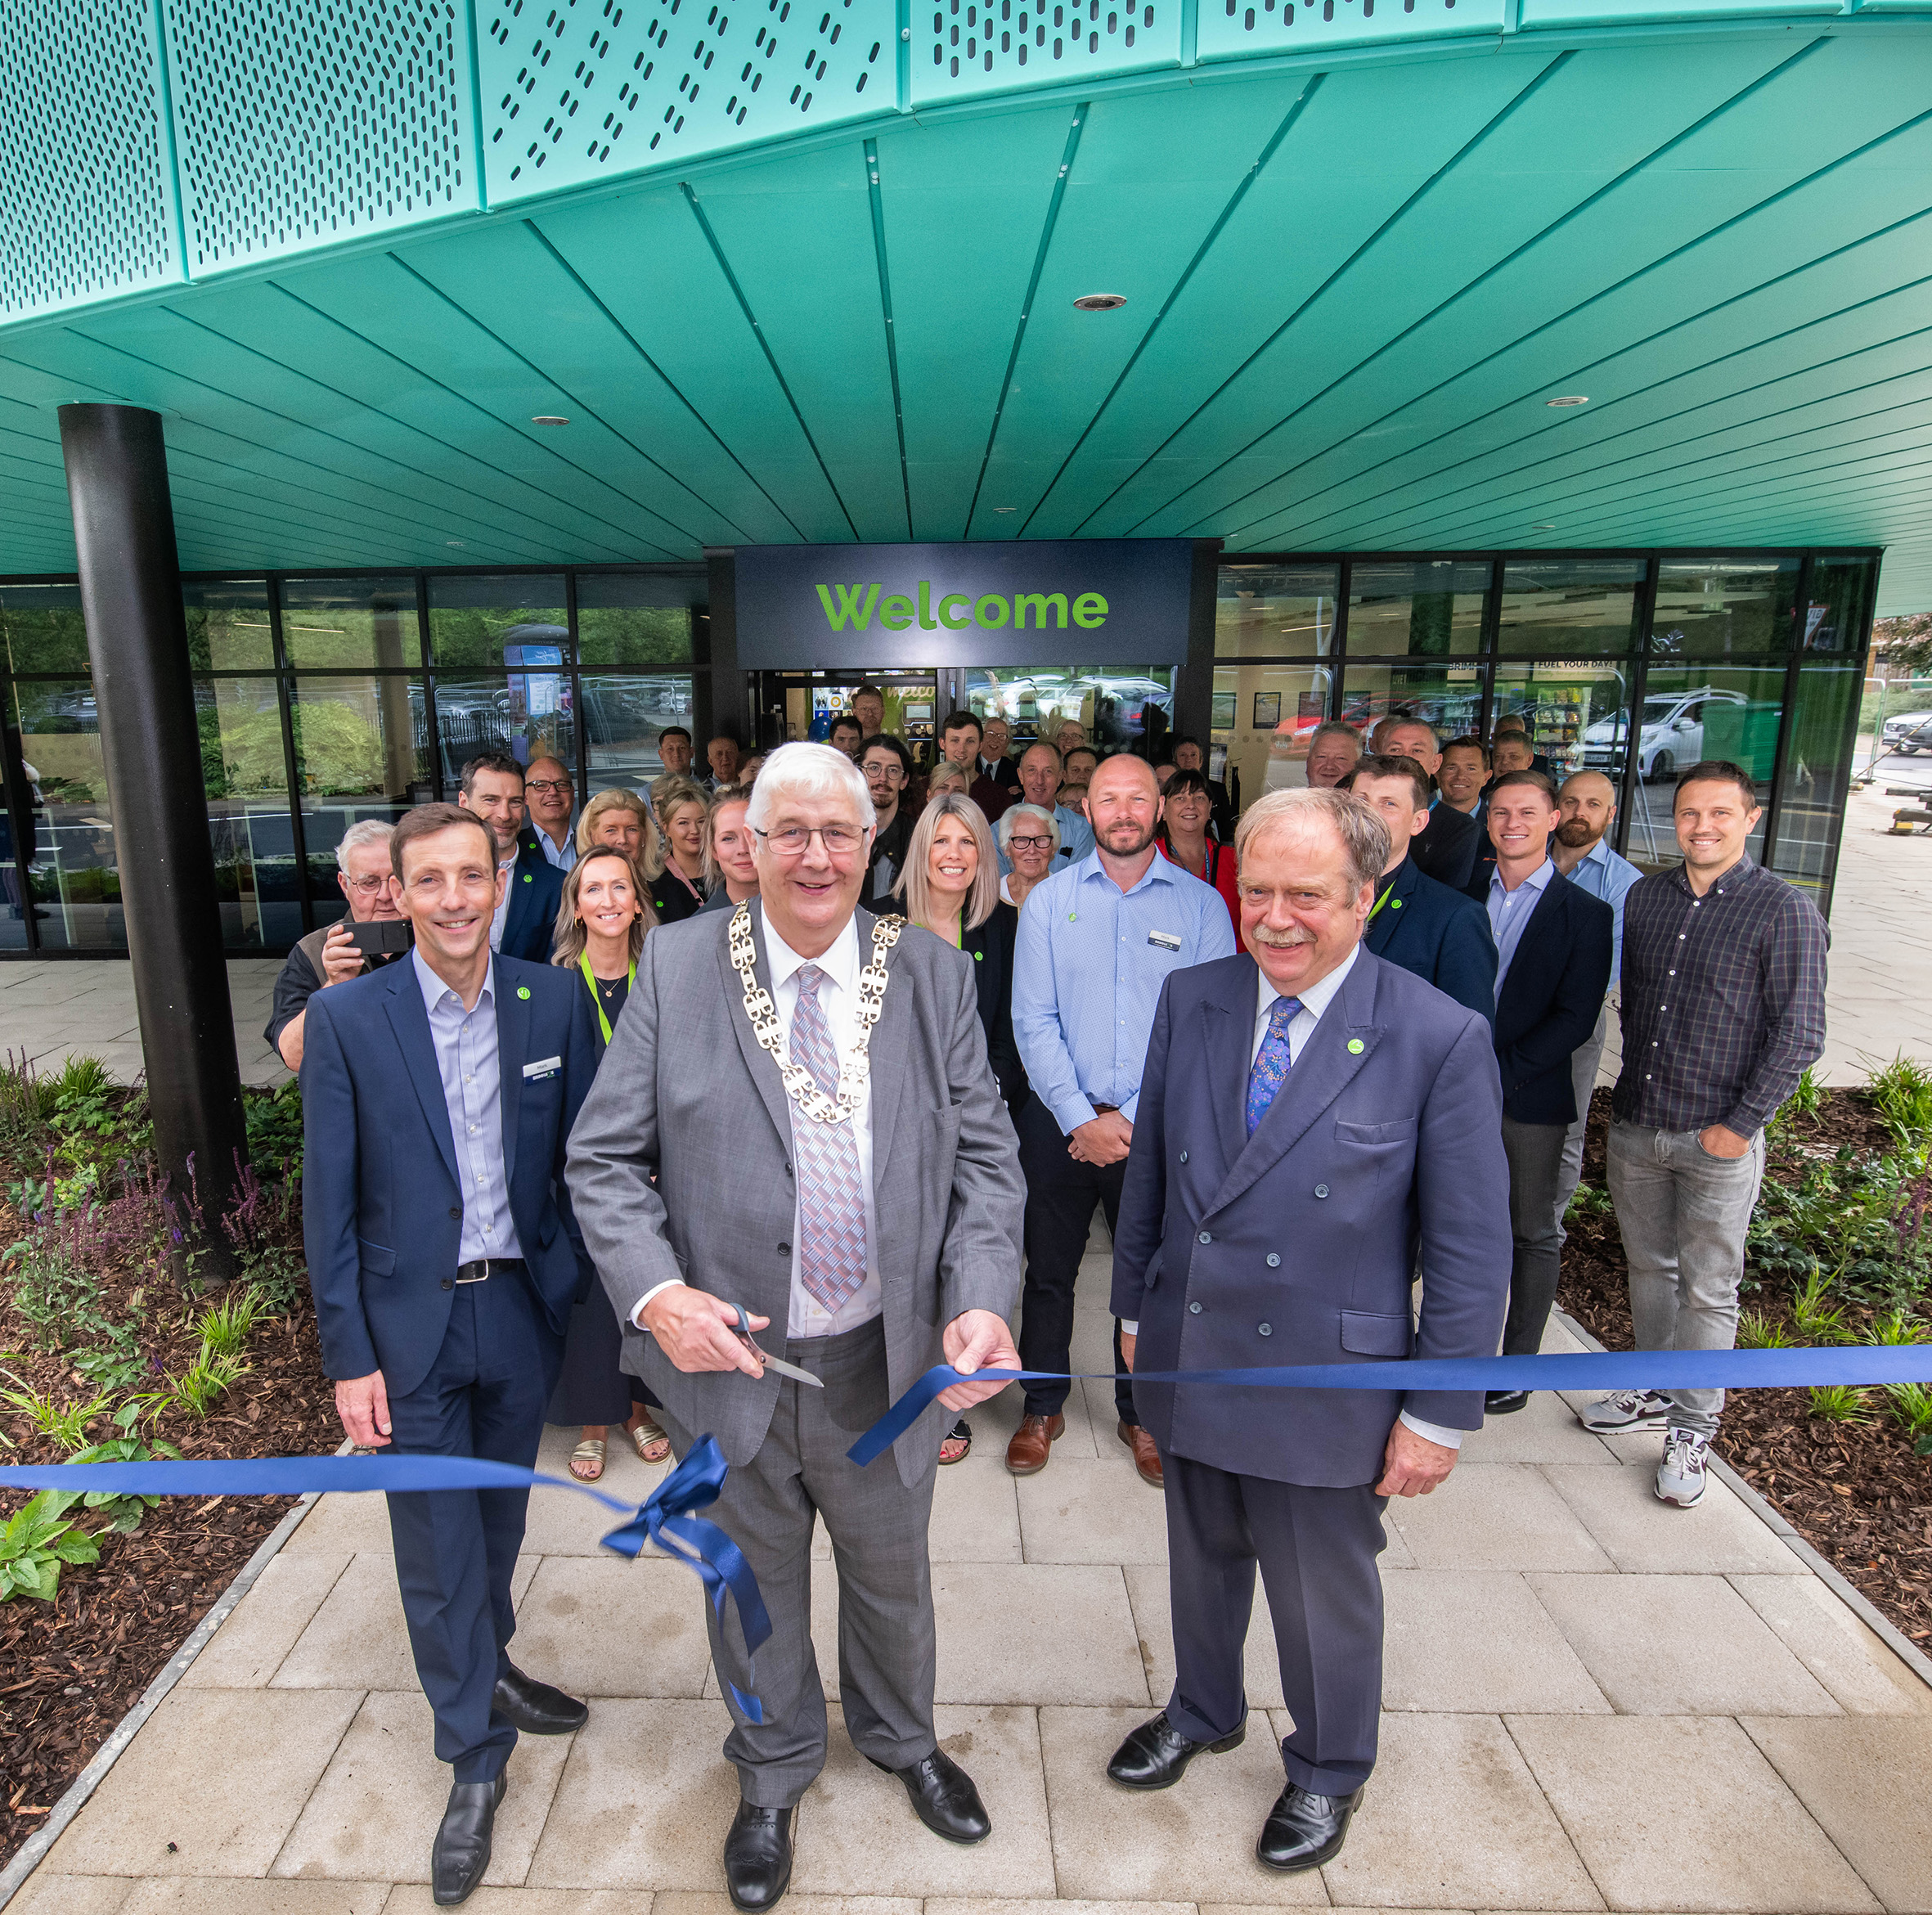 The chairman of North Yorkshire Council, Cllr David Ireton, with colleagues from North Yorkshire Council, Brimhams Active and partners, officially opens Harrogate Leisure and Wellness Centre.